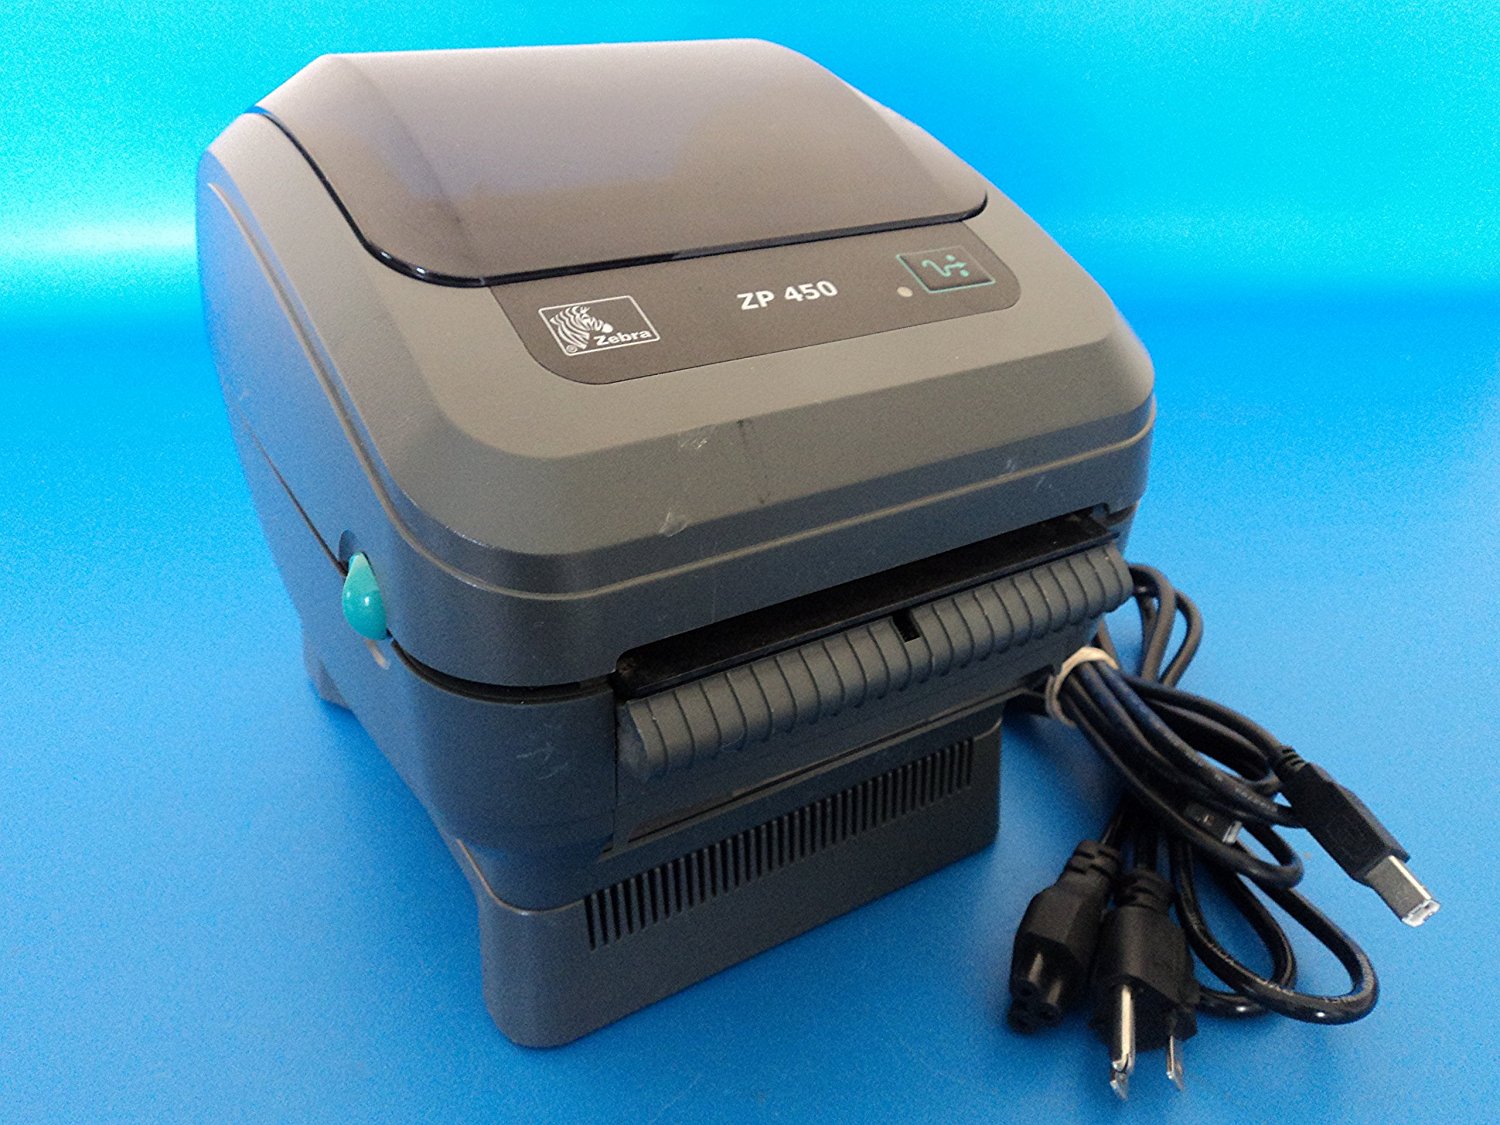 Zebra Zp 450 Usb Thermal Label Printer With Cables Zp450 0501 0006a N3 Free Image Download 2413